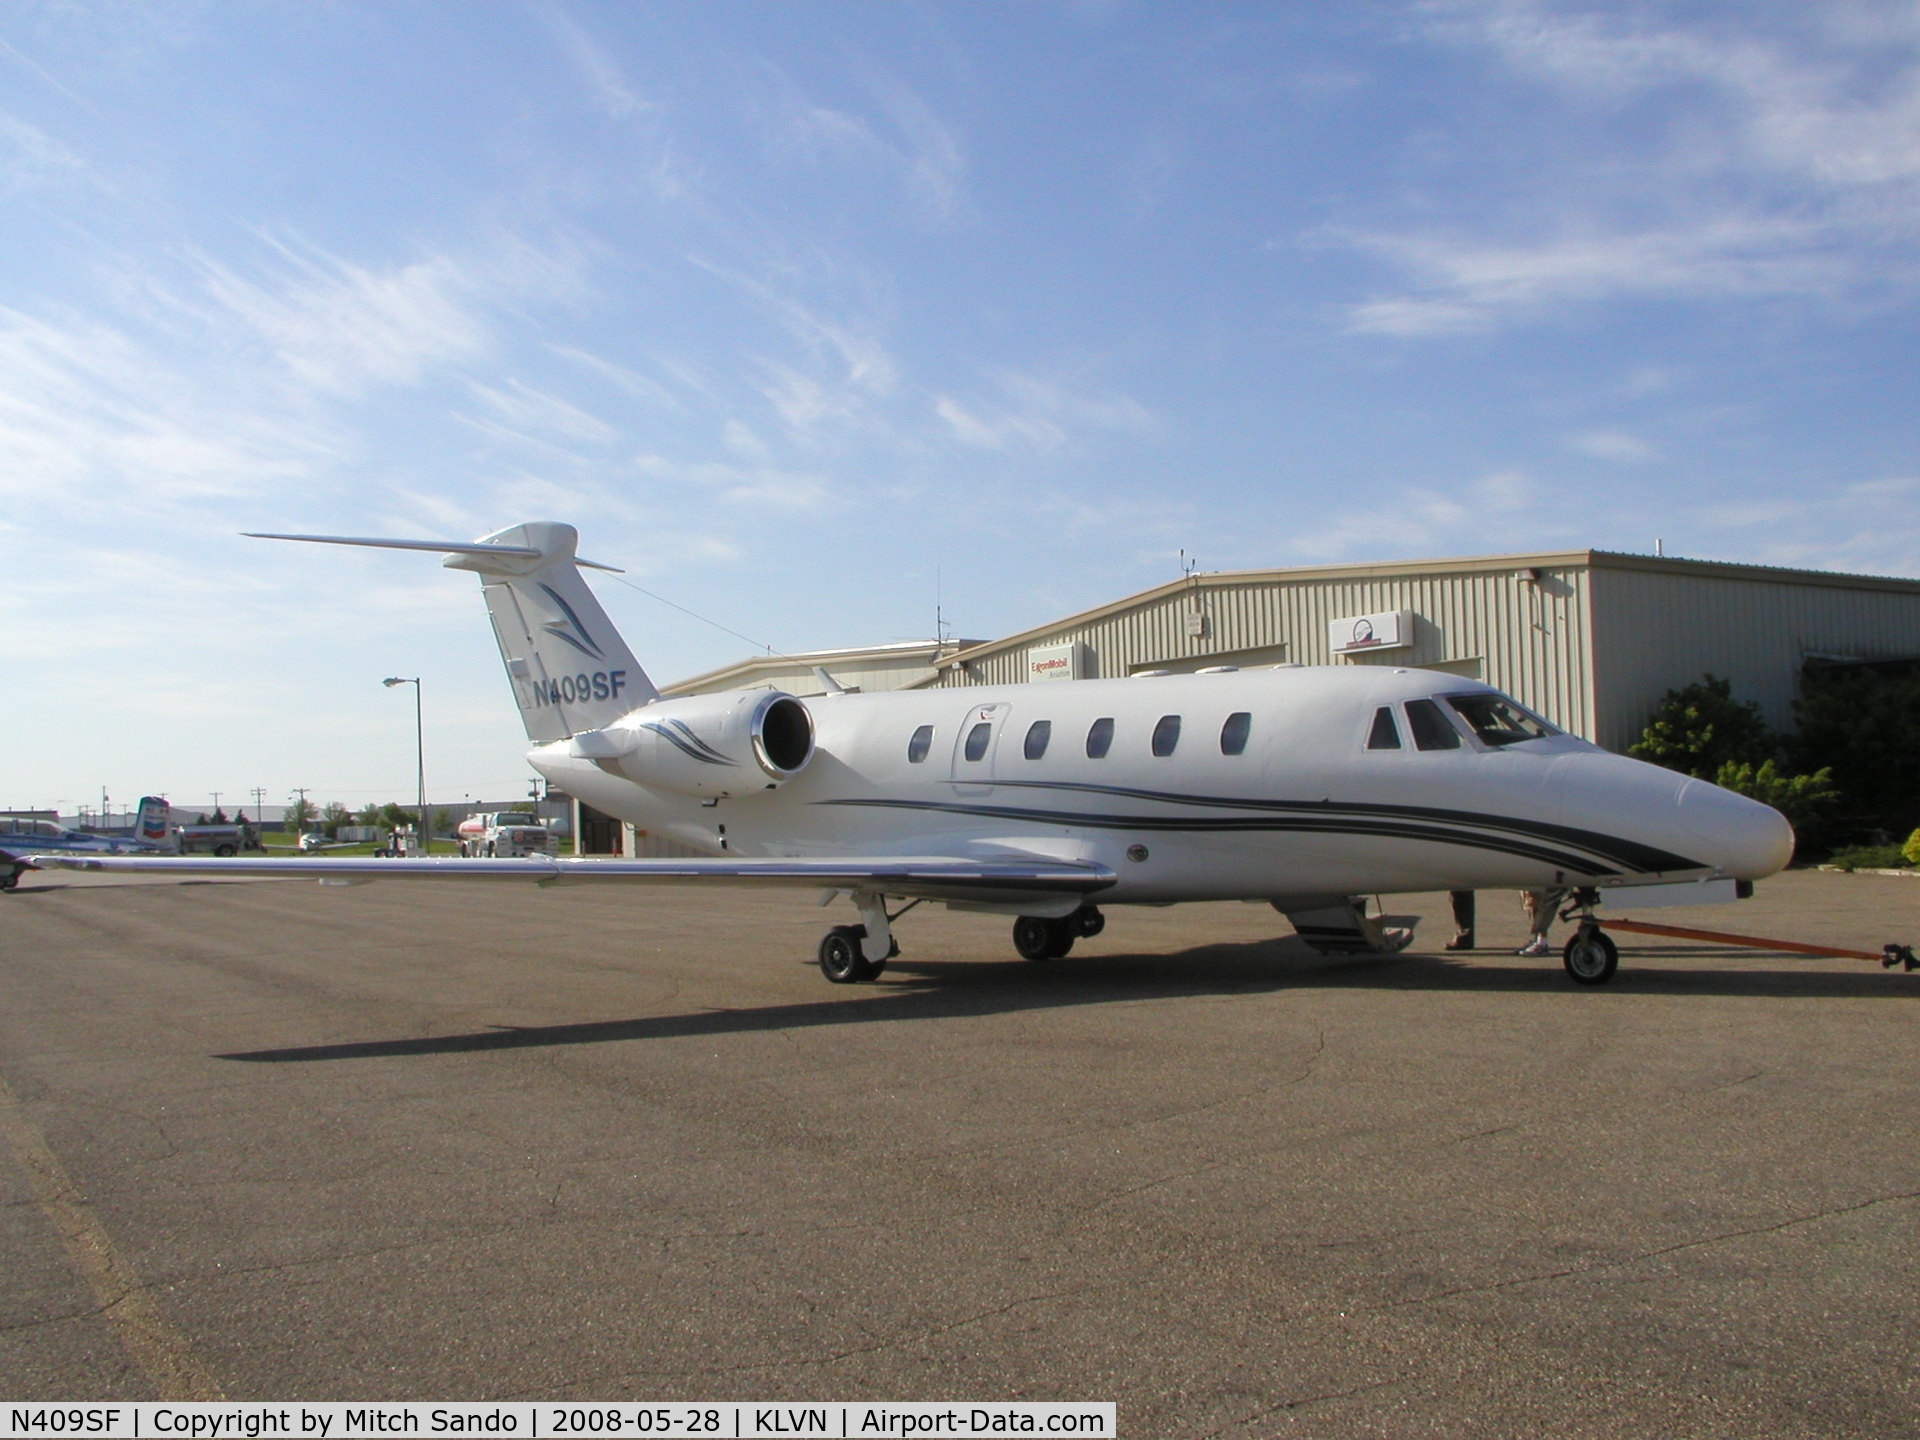 N409SF, 1984 Cessna 650 Citation C/N 650-0029, Parked on the ramp at Airlake after coming in from Rogers, AR (ROG).